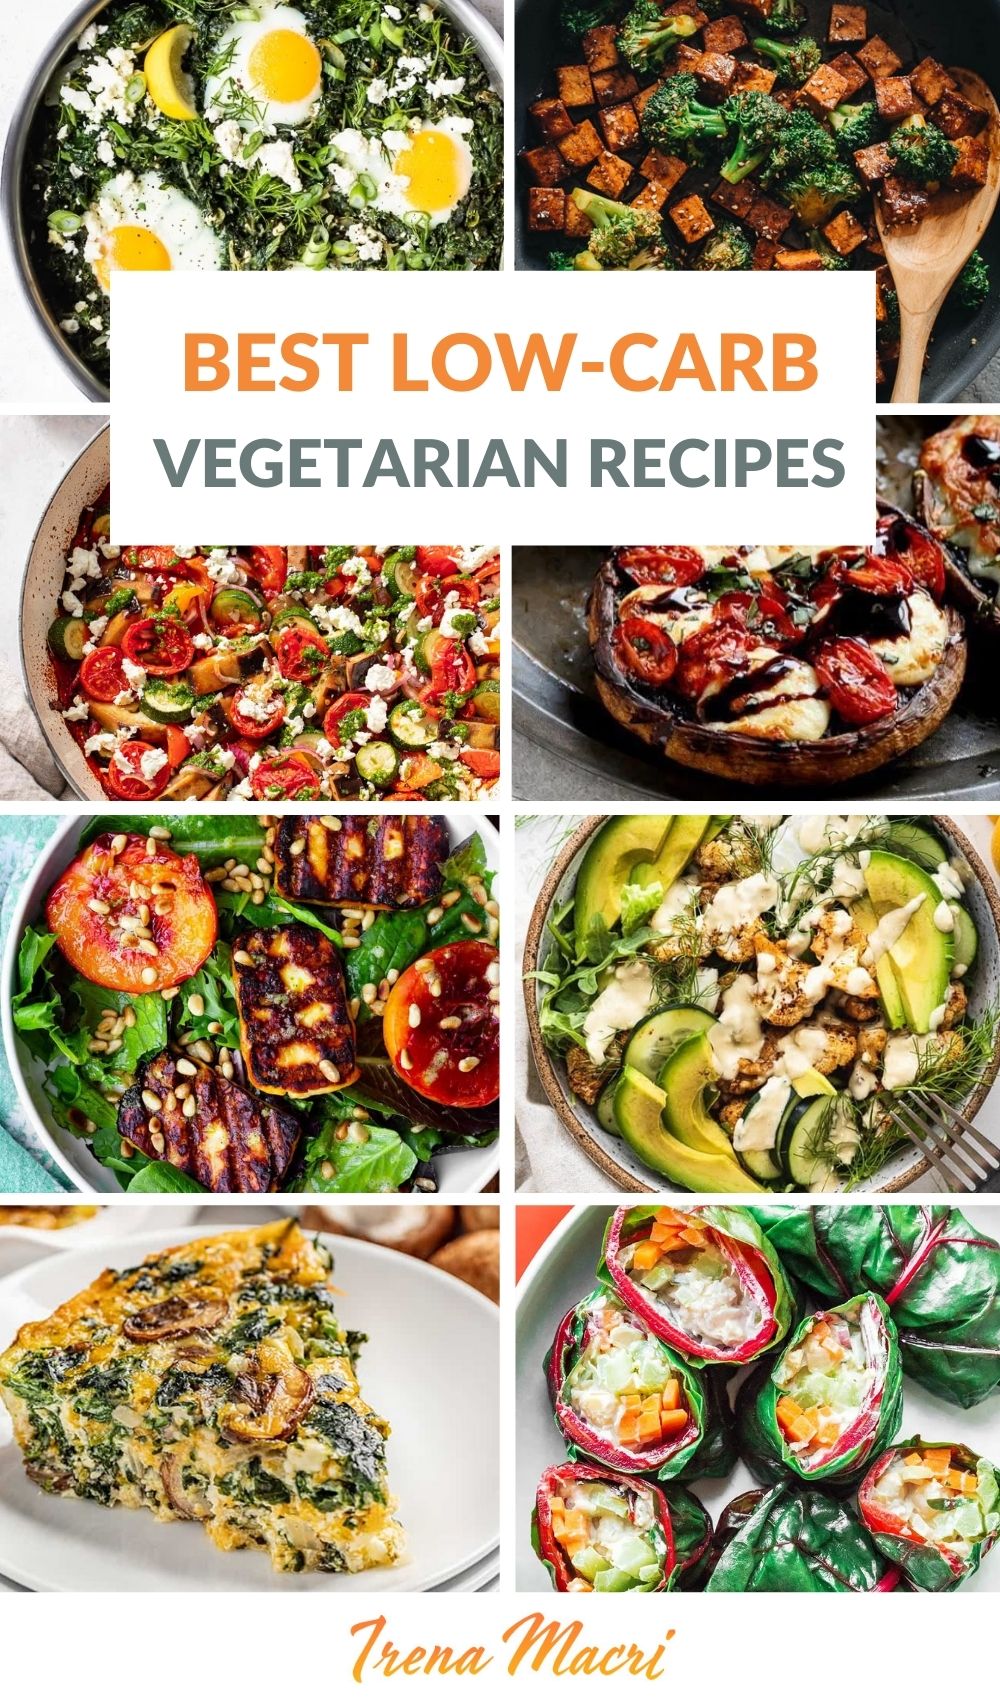 Best Low-Carb Vegetarian Recipes That Are Tasty & Satiating